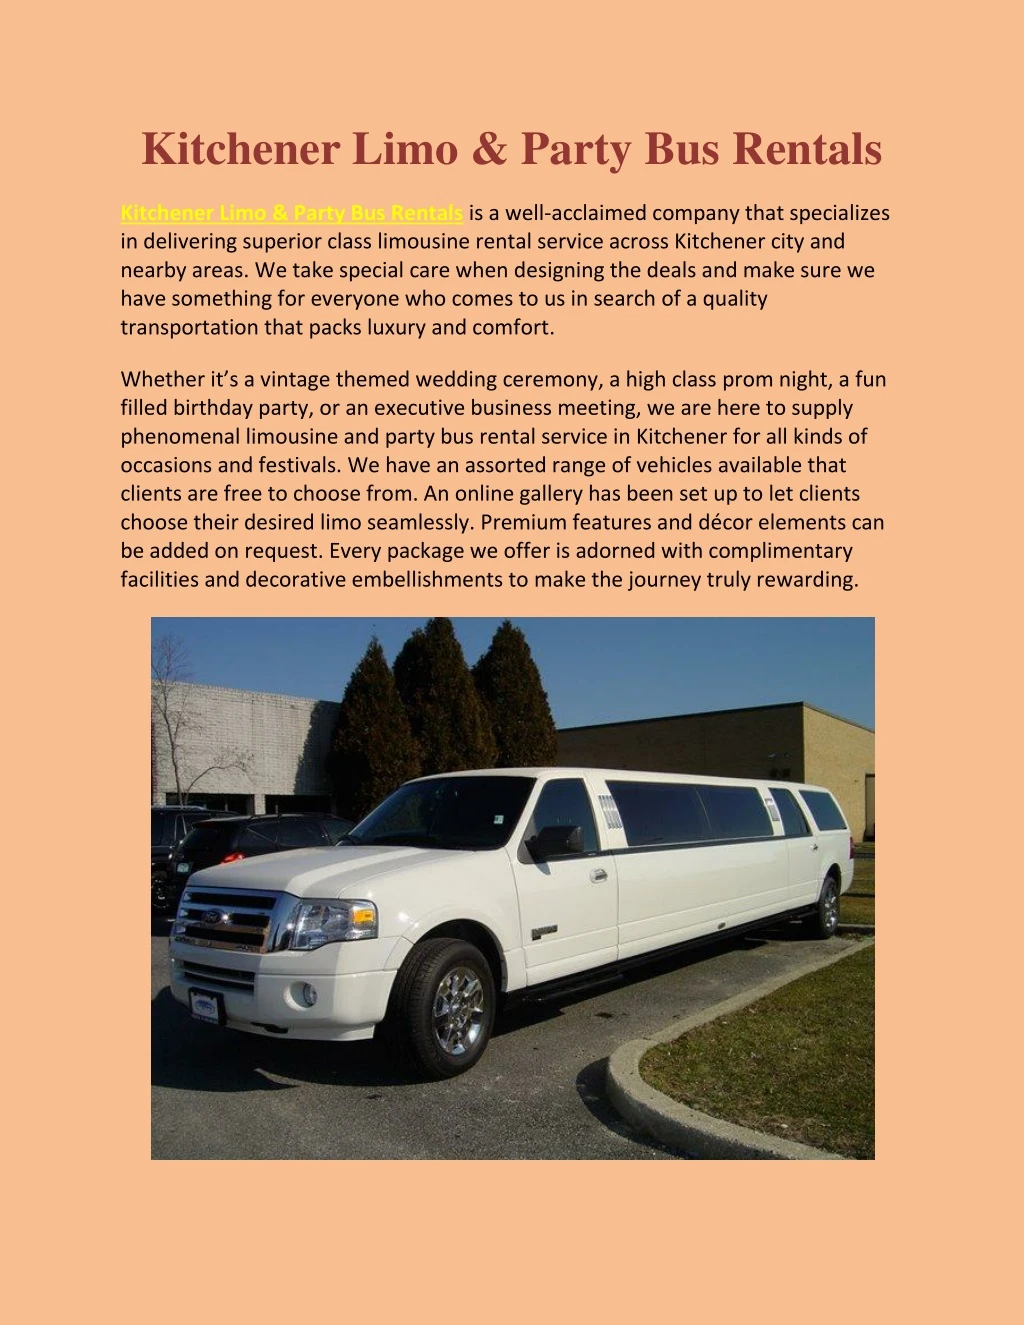 kitchener limo party bus rentals